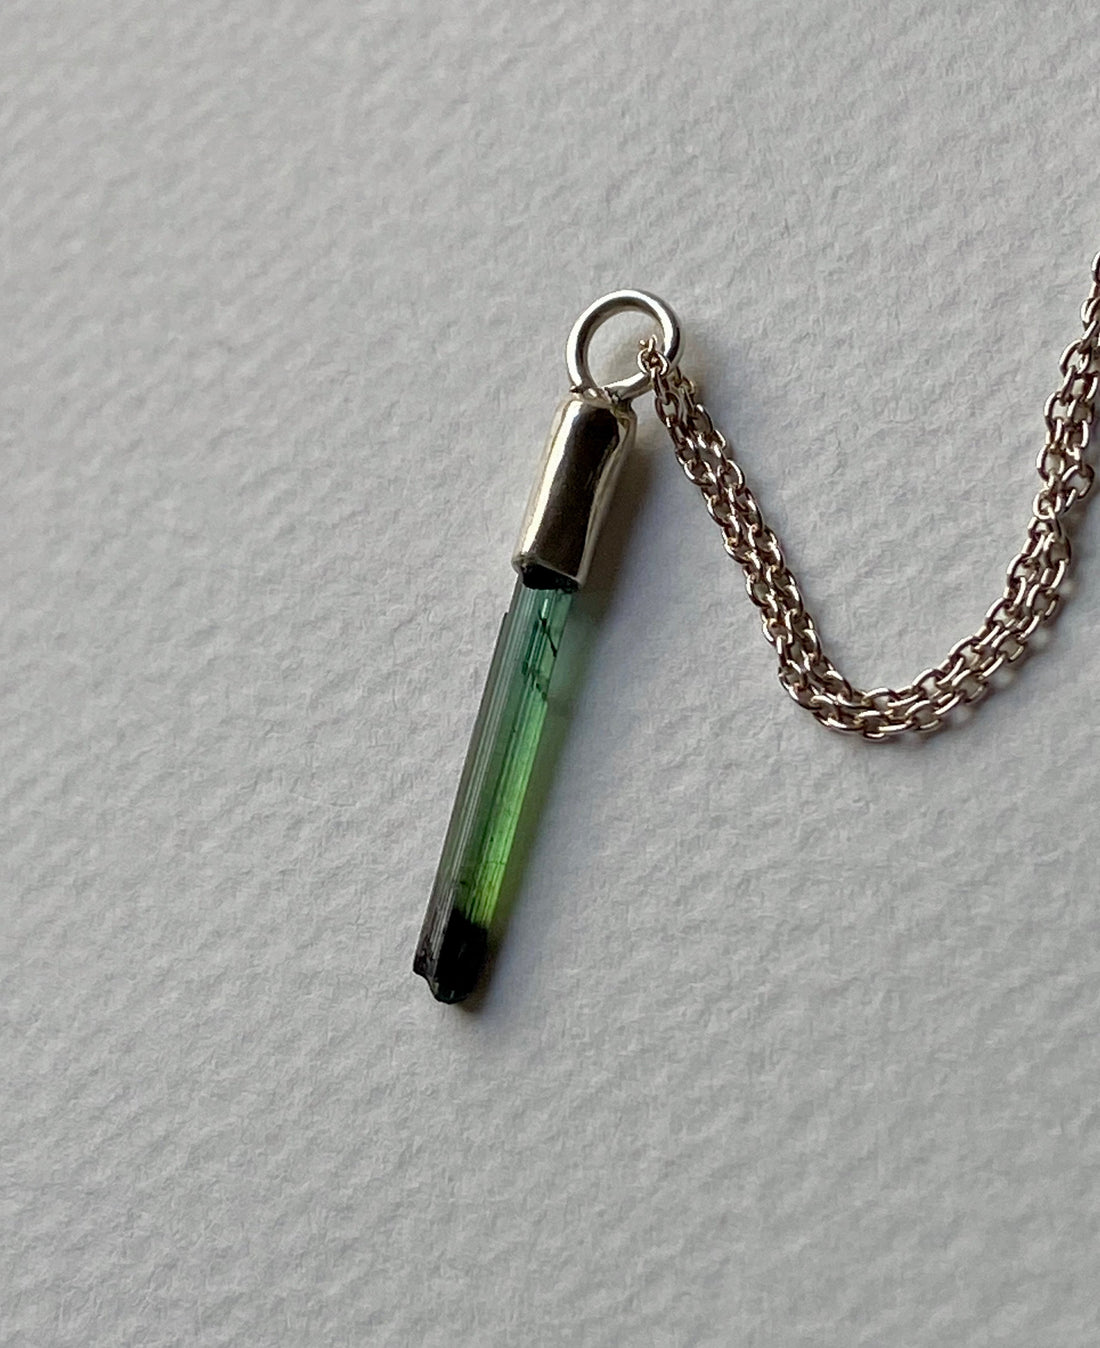 Raw Indicolite Blue Green Tourmaline Pendant Necklace, October Birthstone Pendant Necklace, Sterling Silver